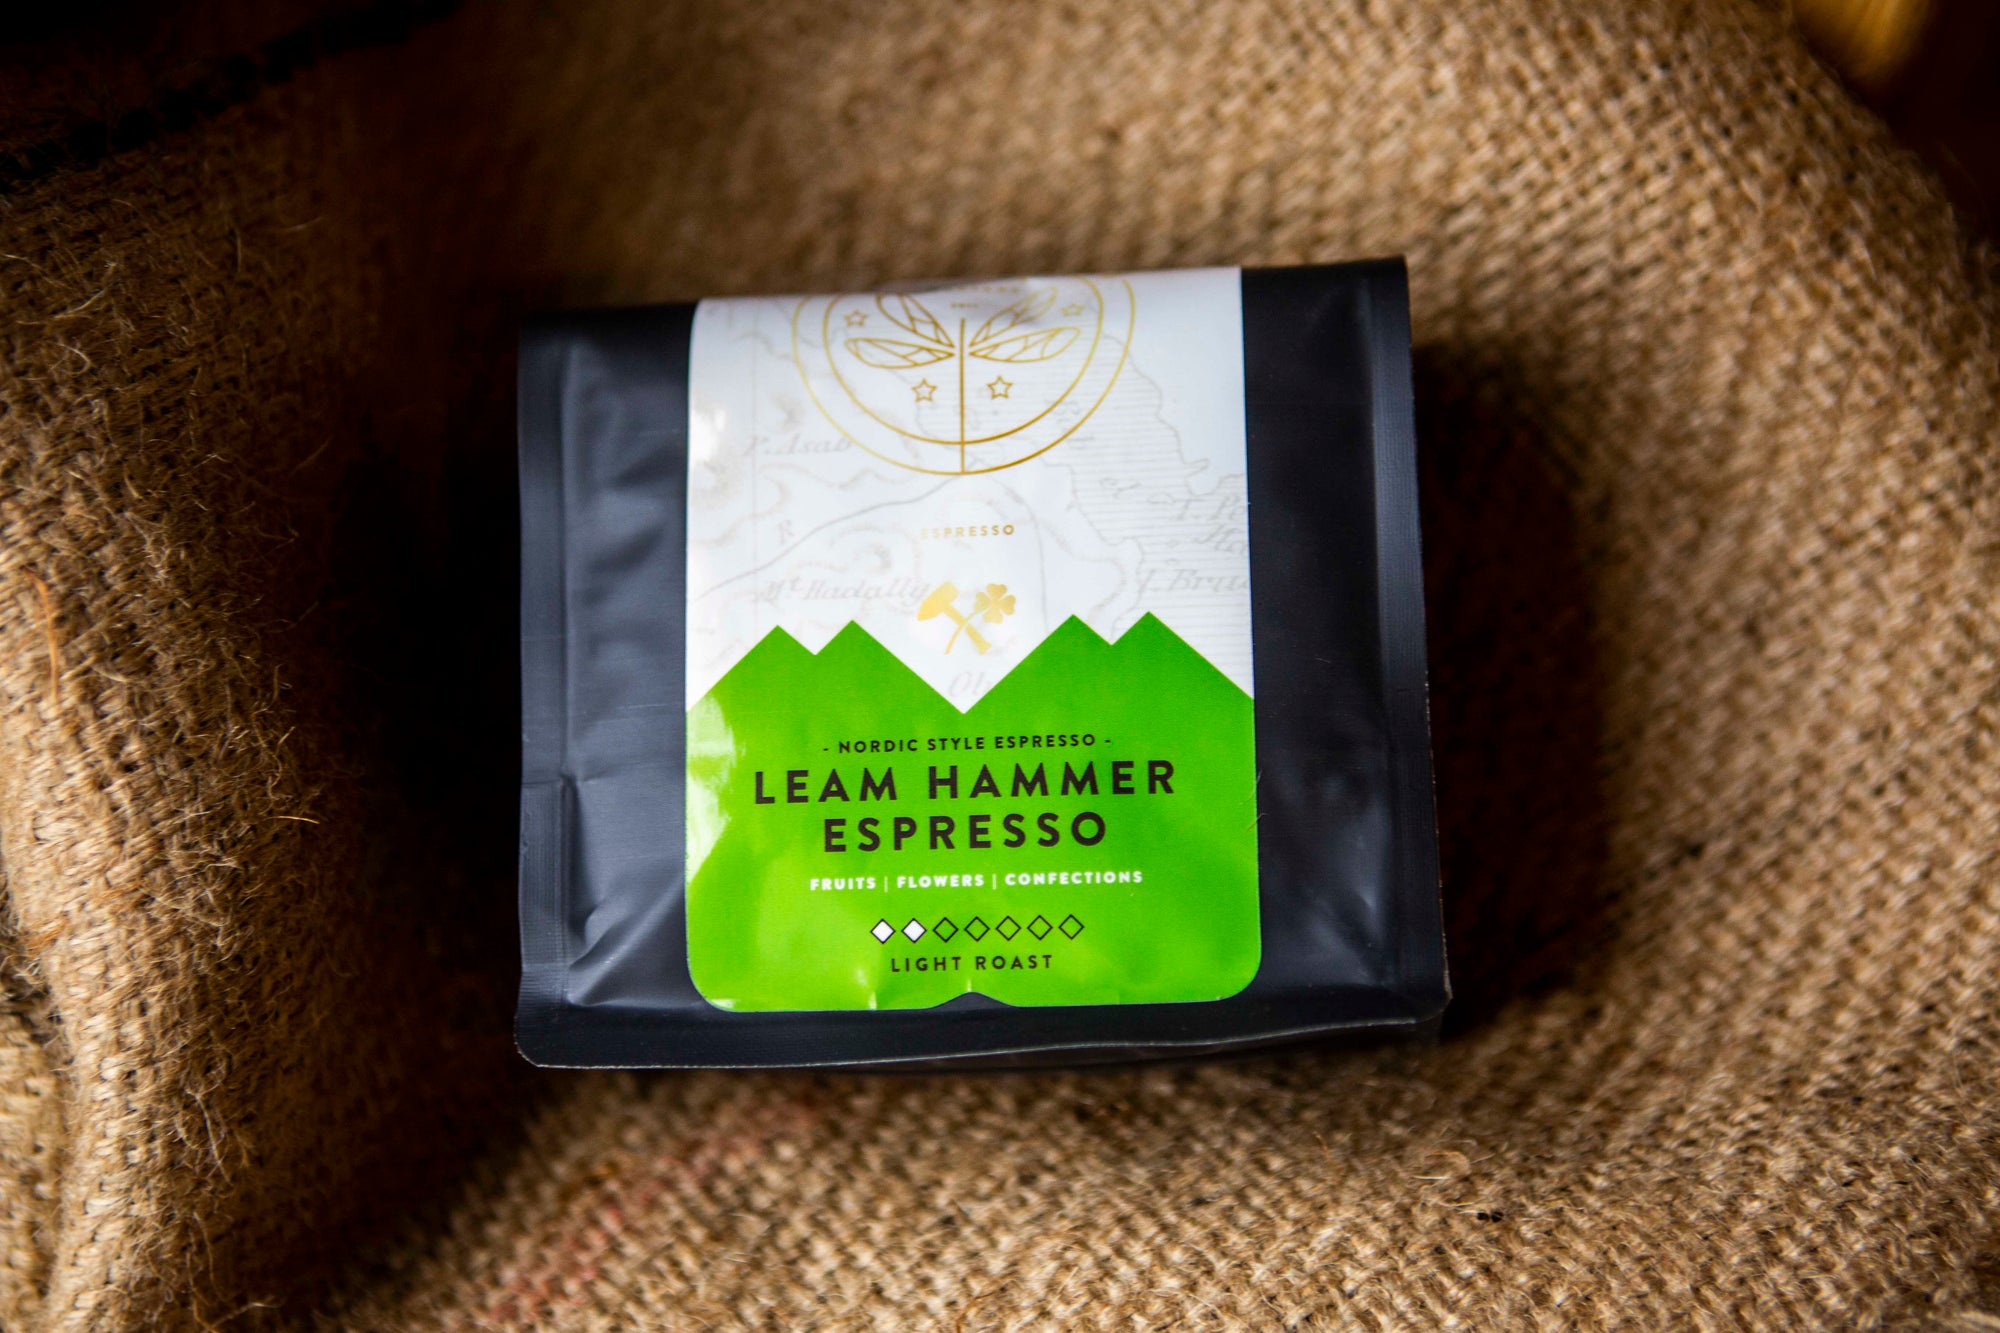 America's Best Espresso 2nd Place - The Leam Hammer Blend